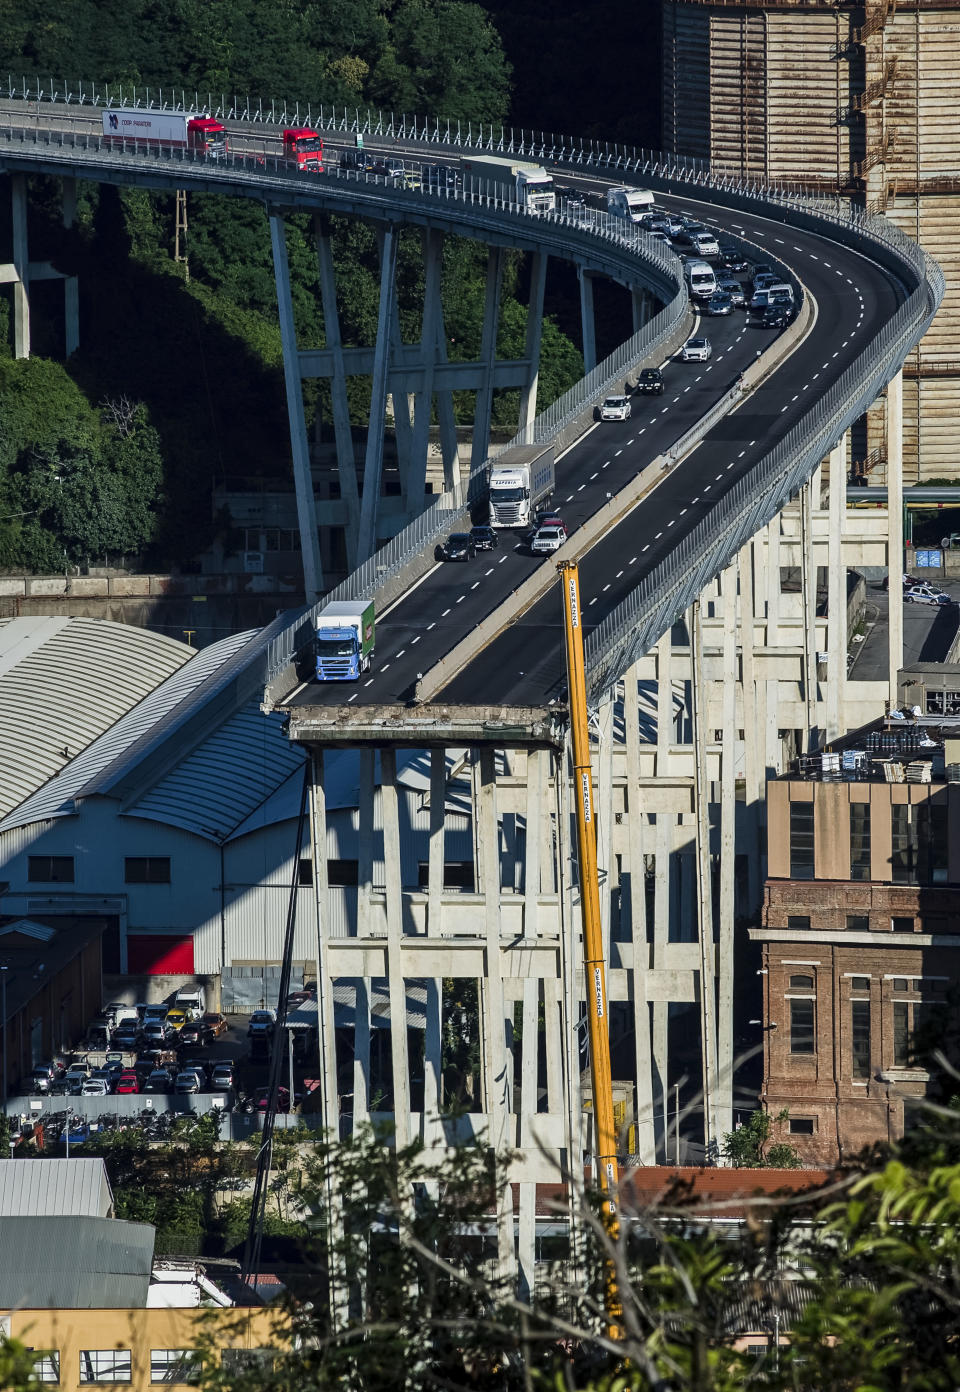 FILE - A general view of the collapsed Morandi highway bridge in Genoa, northern Italy, Wednesday, Aug. 15, 2018. Fifty-nine people went on trial Thursday, July 7, 2022, for the 2018 collapse of Genoa’s Morandi bridge, accused of manslaughter and other charges in the deaths of 43 people.The defendants include former executives and experts of the company that manages many of Italy’s bridges and highways, as well as former officials of the transport and infrastructure ministry. (AP Photo/Nicola Marfisi)